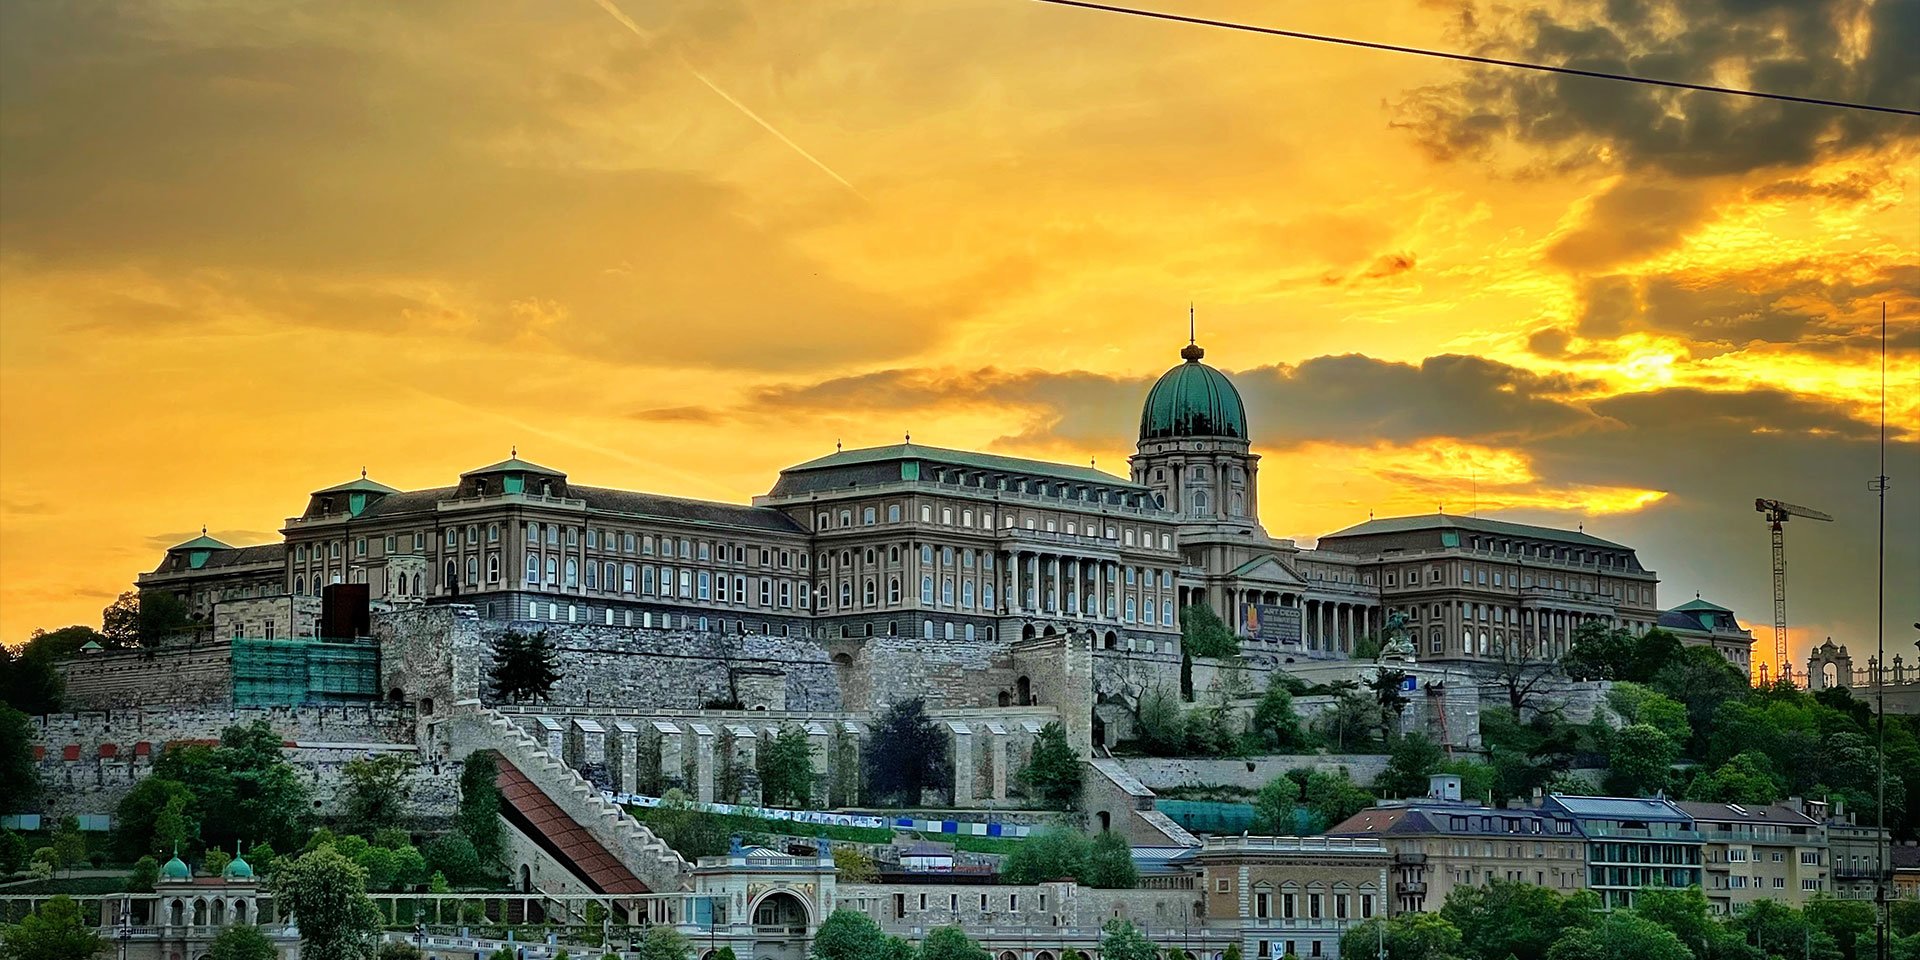 buda castle is a must see during your central europe tour